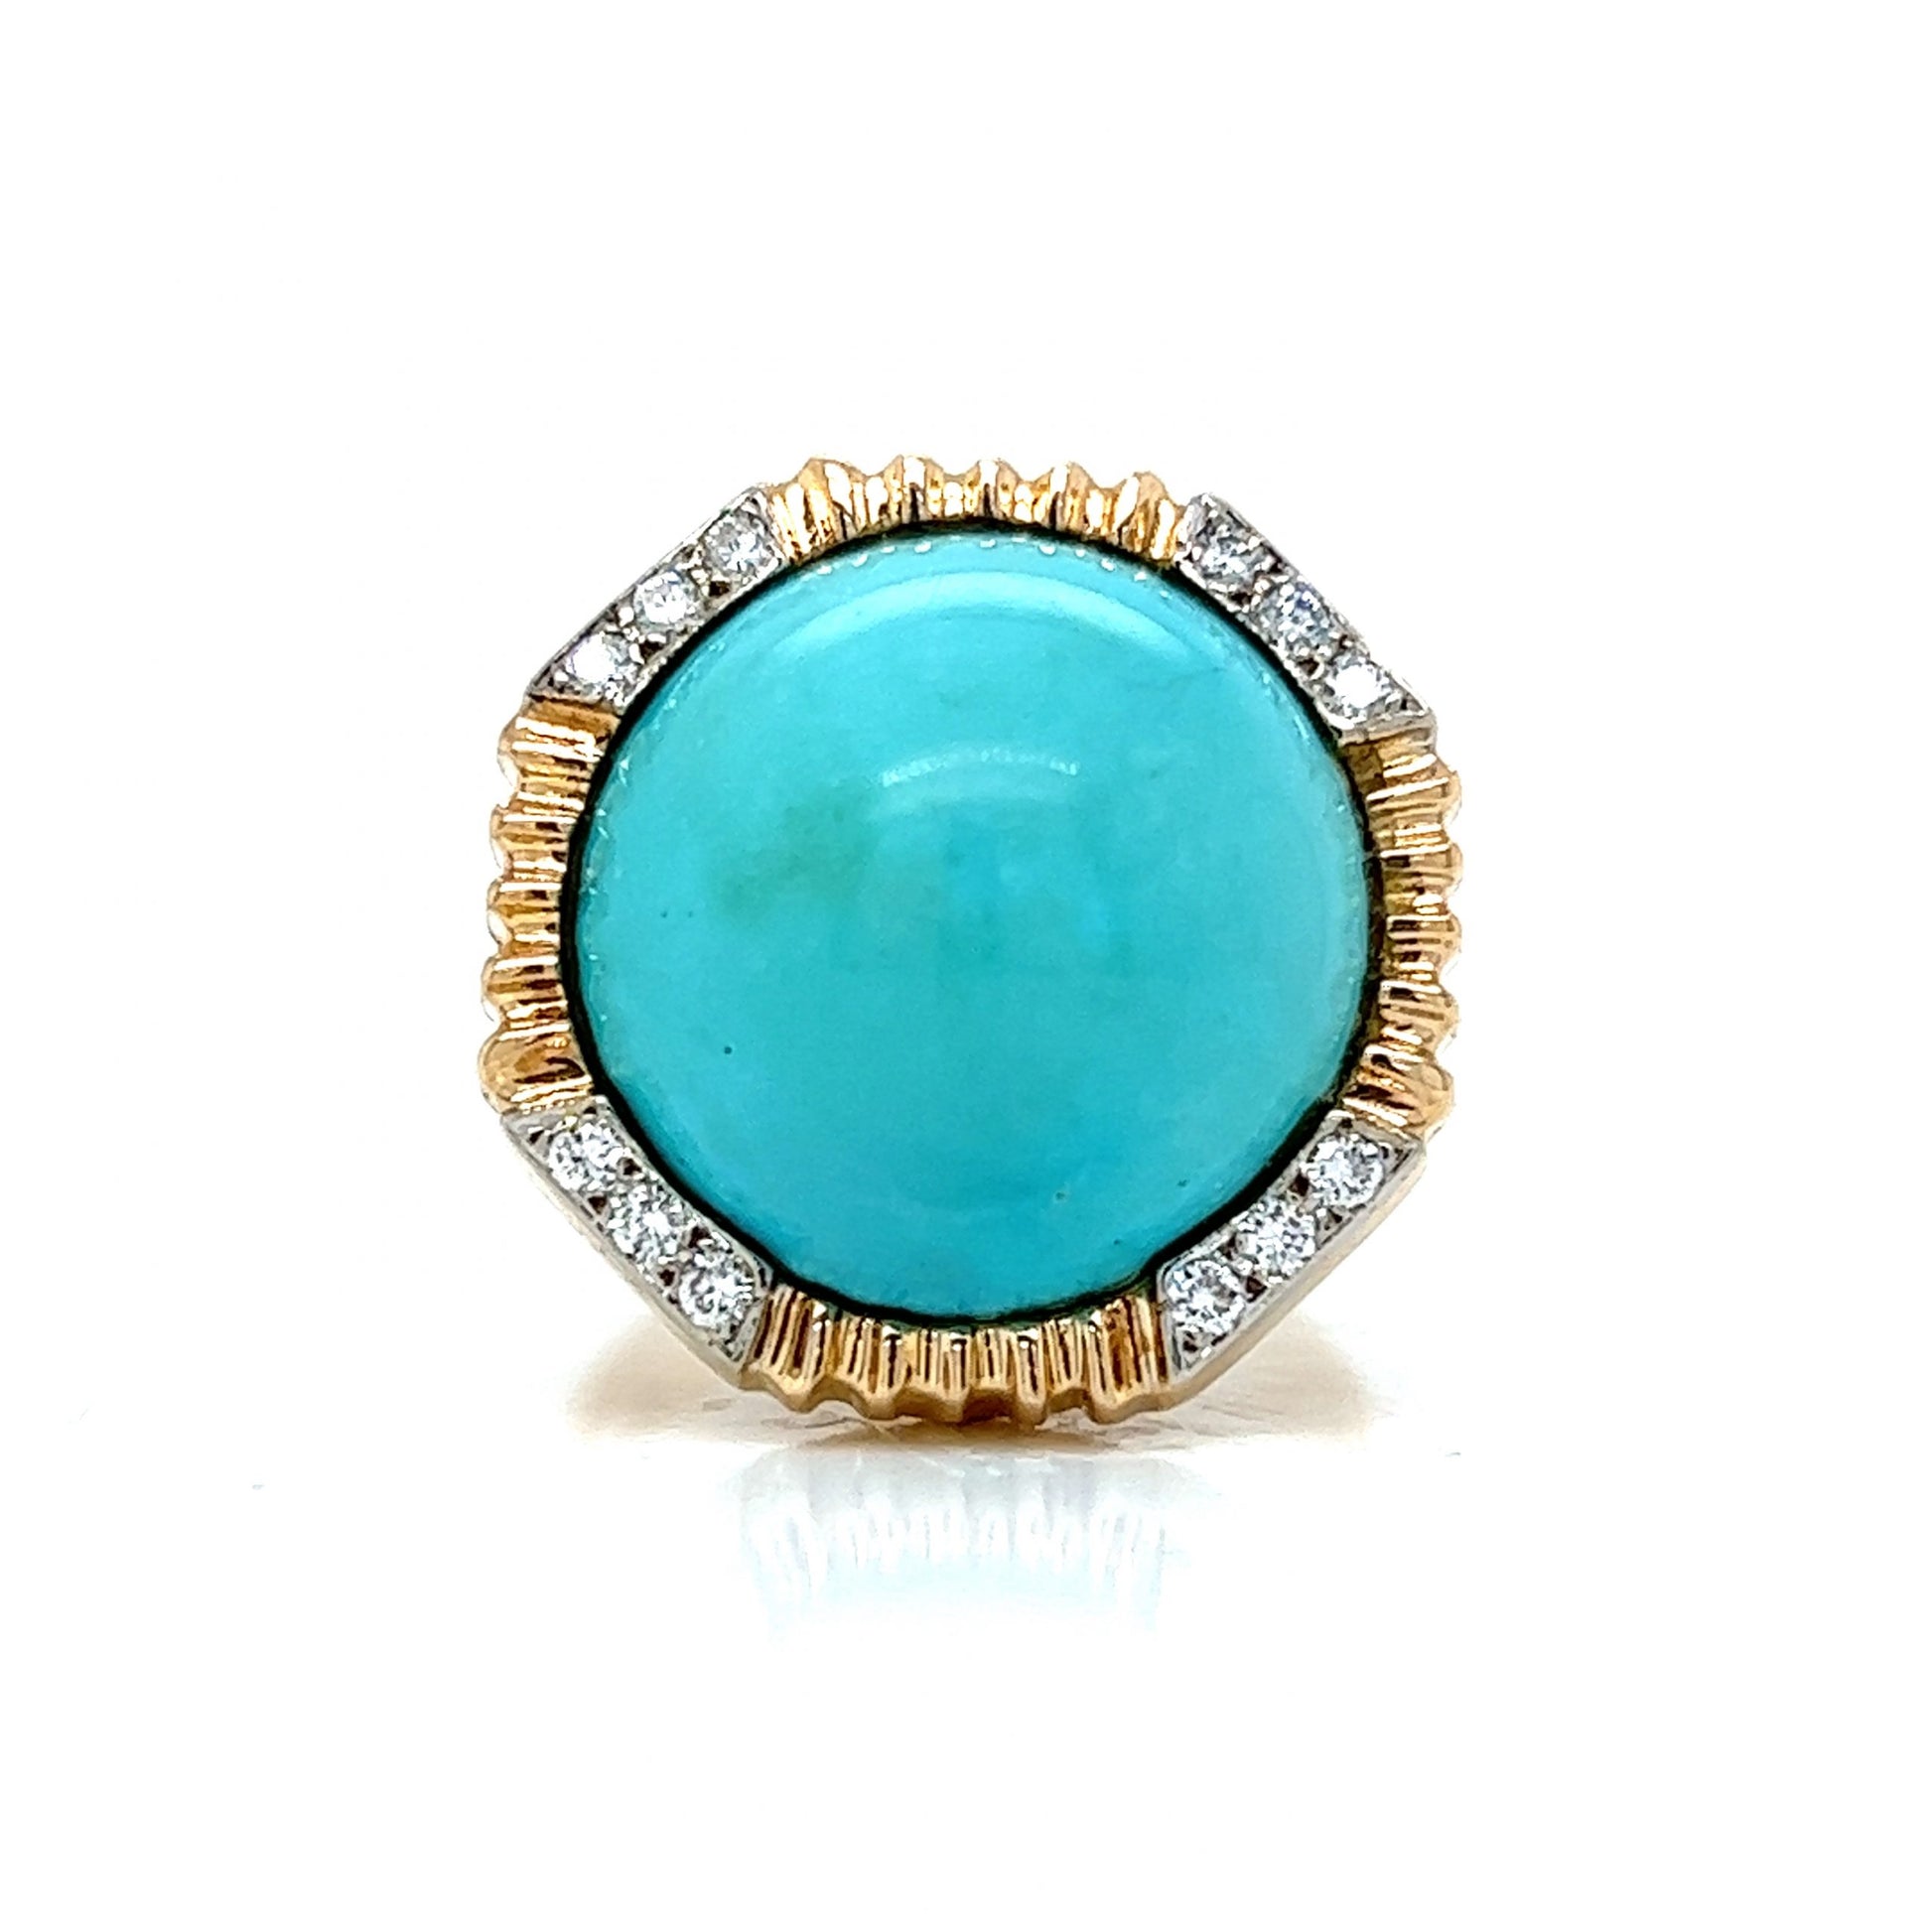 Vintage Round Turquoise & Diamond Ring in 14k Yellow GoldComposition: 14 Karat Yellow Gold Ring Size: 6.5 Total Diamond Weight: .24ct Total Gram Weight: 8.8 g Inscription: 14k
      